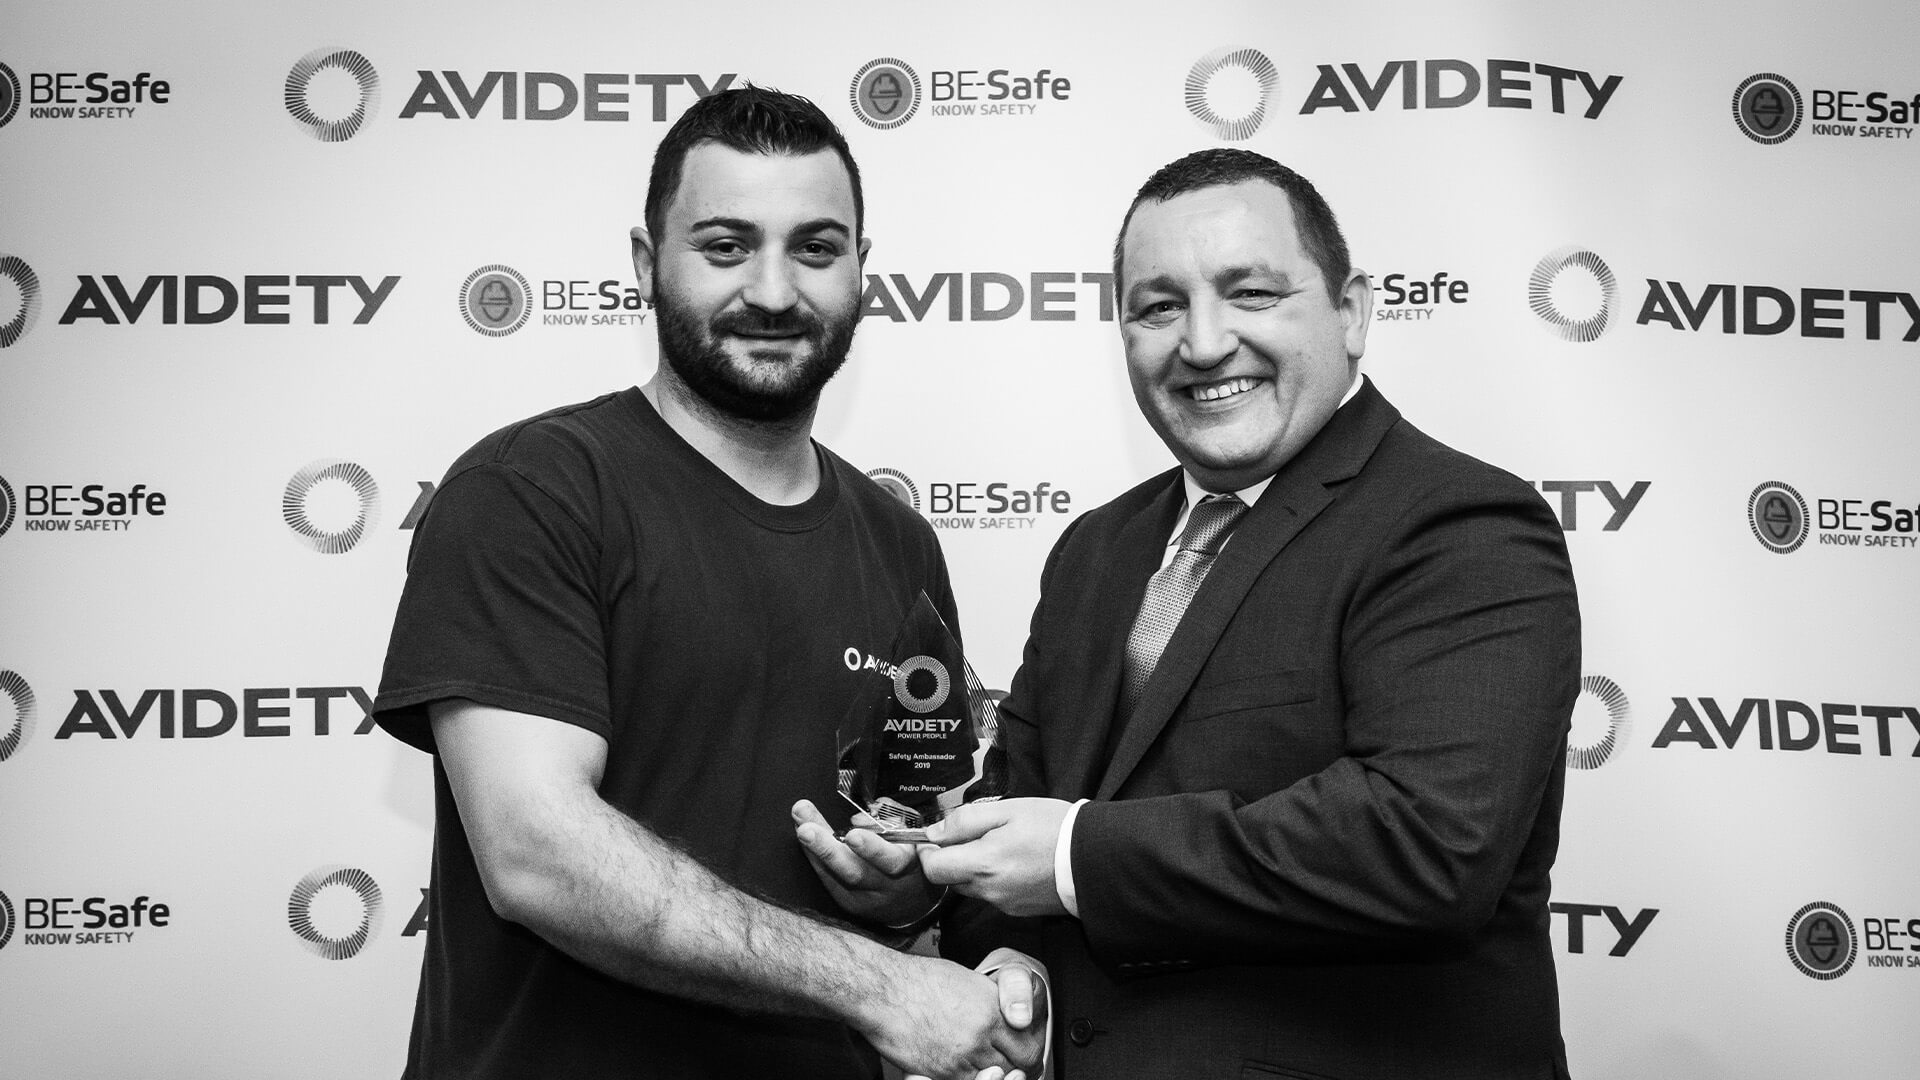 2 Men Standing in Front of Avidety Logo Shaking Hands and Holding a Trophy, the Photo is in Black and White